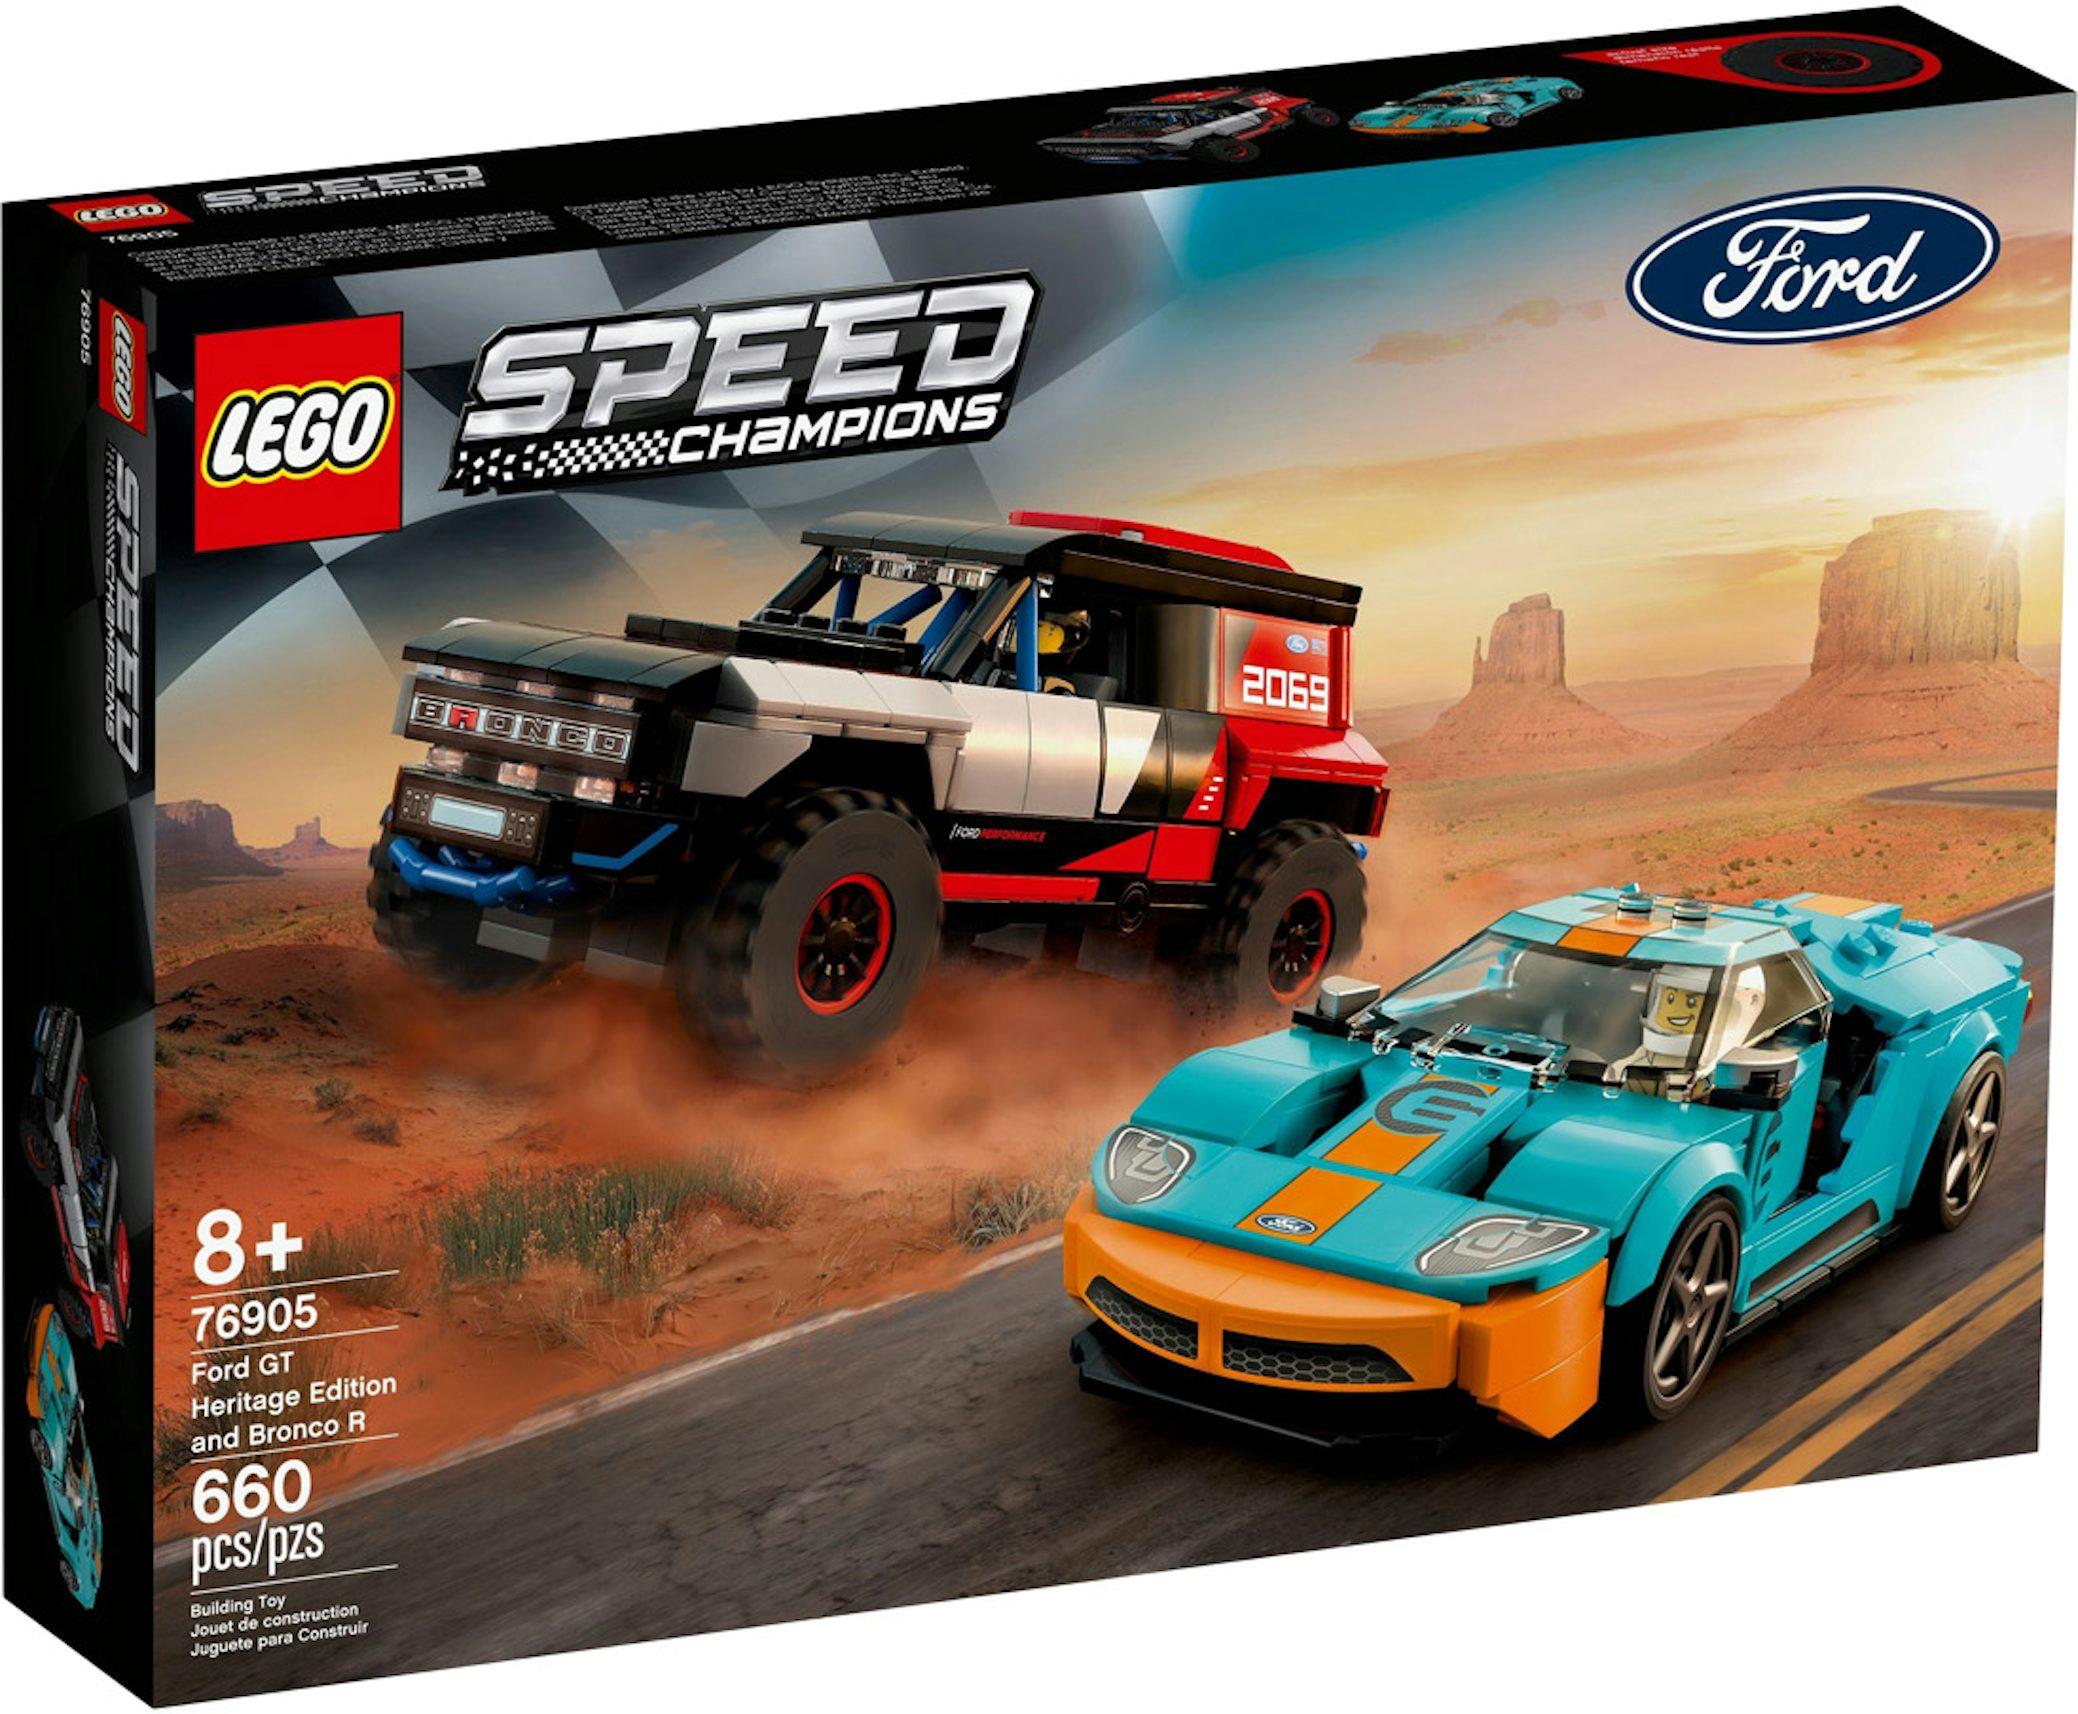 LEGO Speed Champions Ford GT Heritage Edition and Bronco R Set 76905 - US